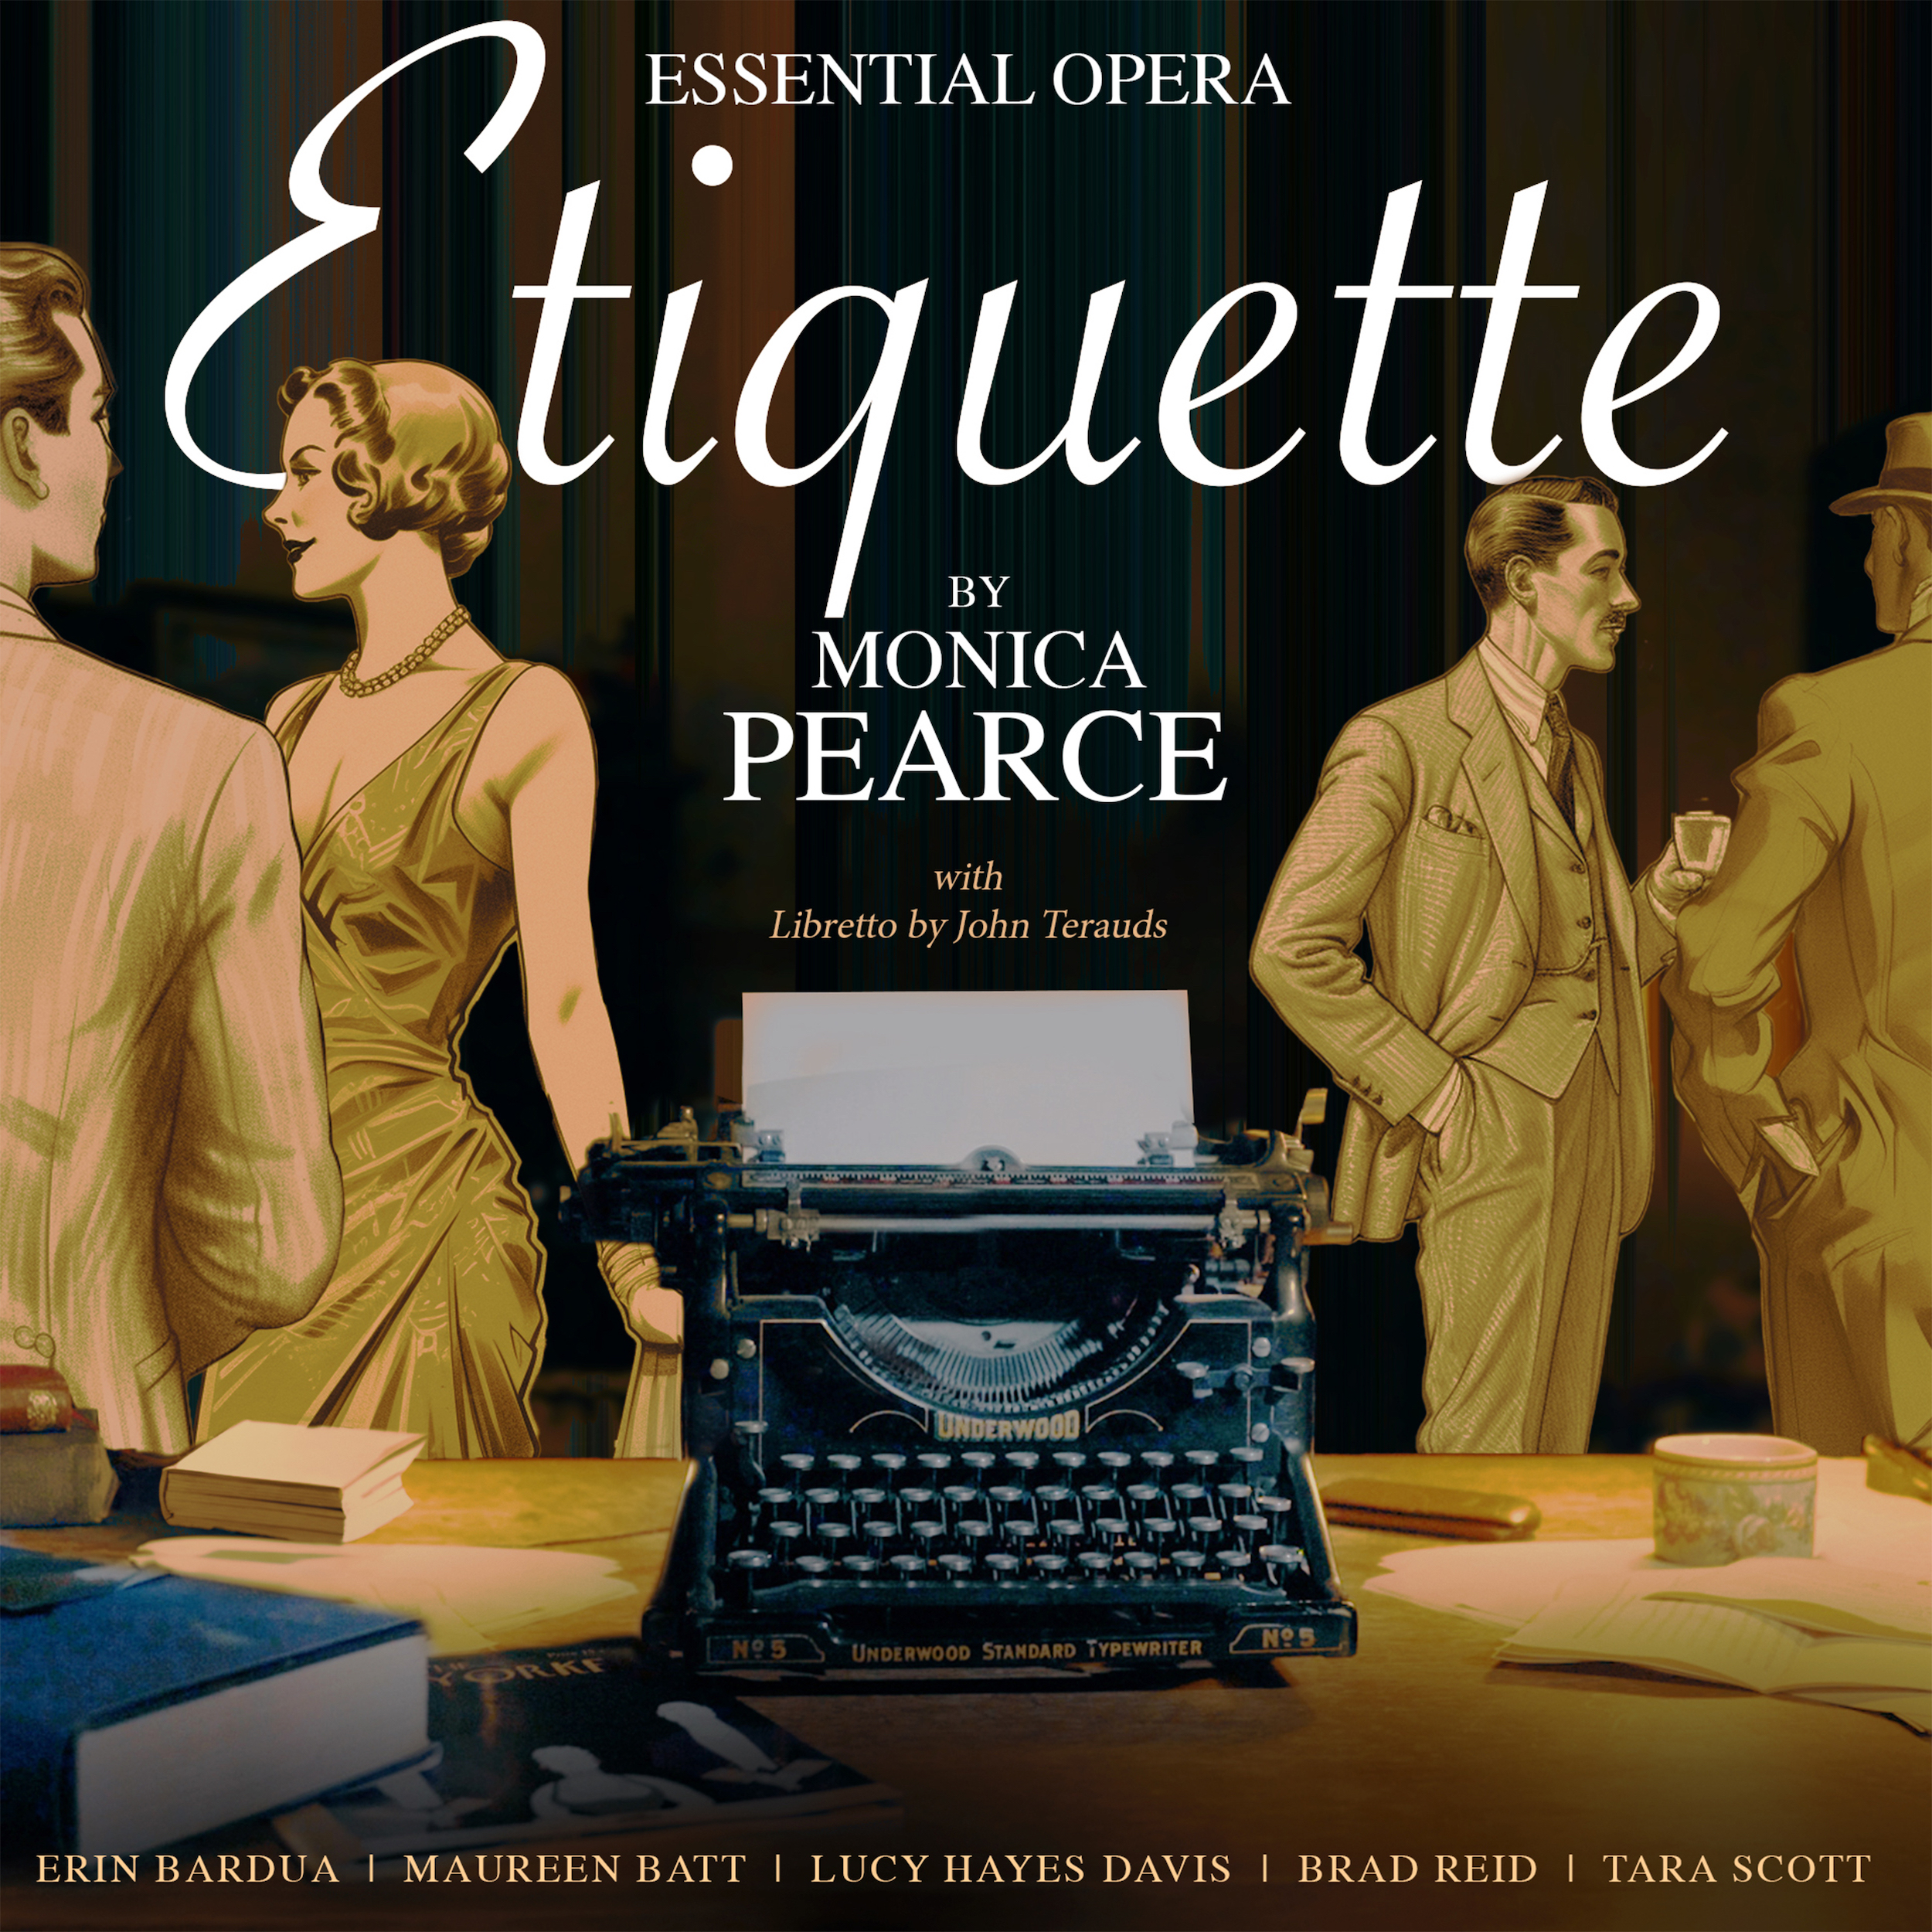 Cover art for Etiquette - dark background with white text that reads Essential Opera Etiquette by Monica Pearce Pearce with libretto by John Terauds. Text at the bottom reads: Erin Bardua, Maureen Batt, Lucy Hayes Davis, Brad Reid, Tara Scott. In the centre of the photo is an old black typewriter on a desk with a book and some scattered papers and items. On the left and right are golden brown images of 1920s figures in dressy clothes.